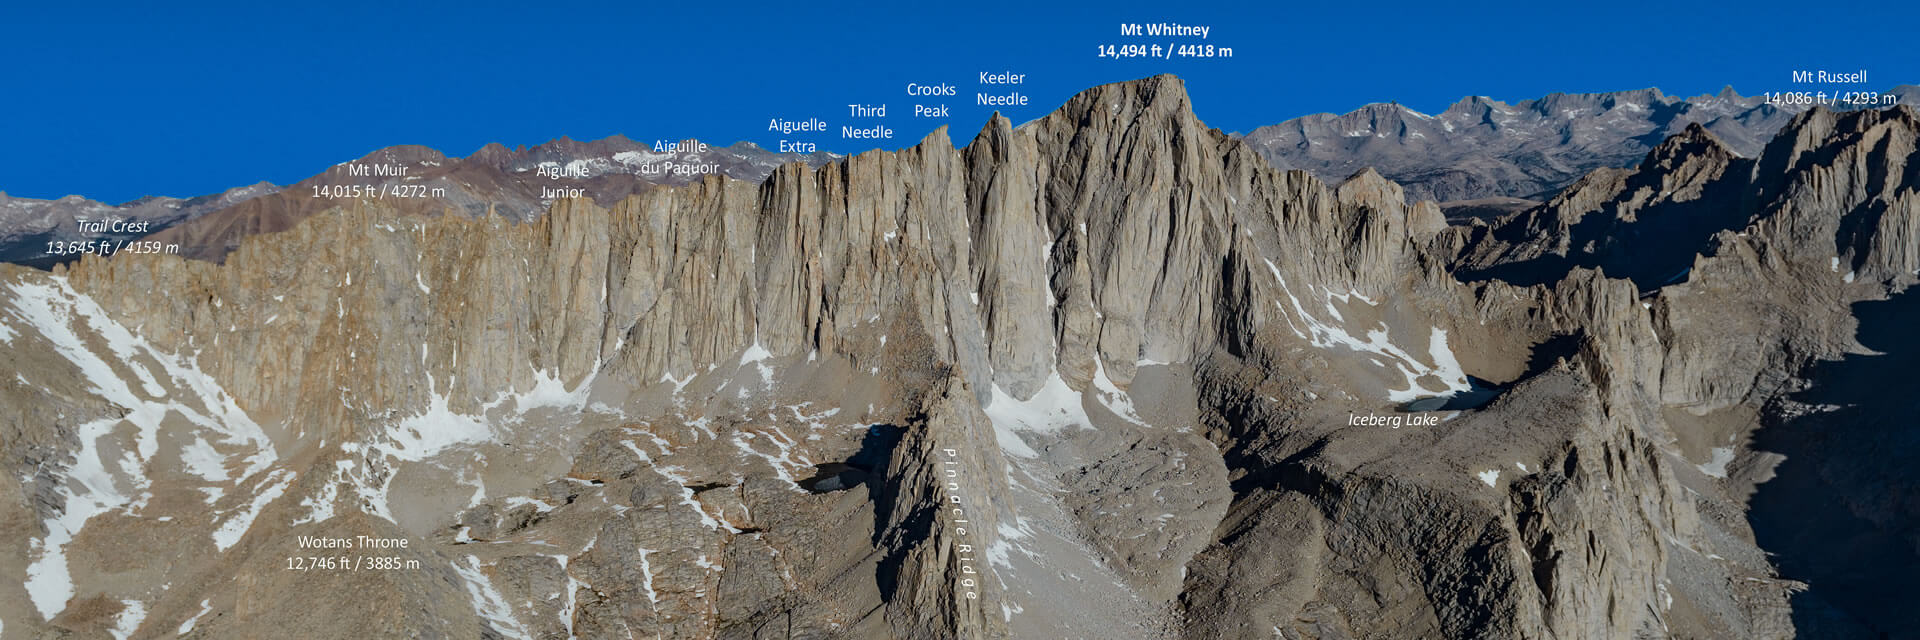 Mt. Whitney and nearby peaks with names and elevations